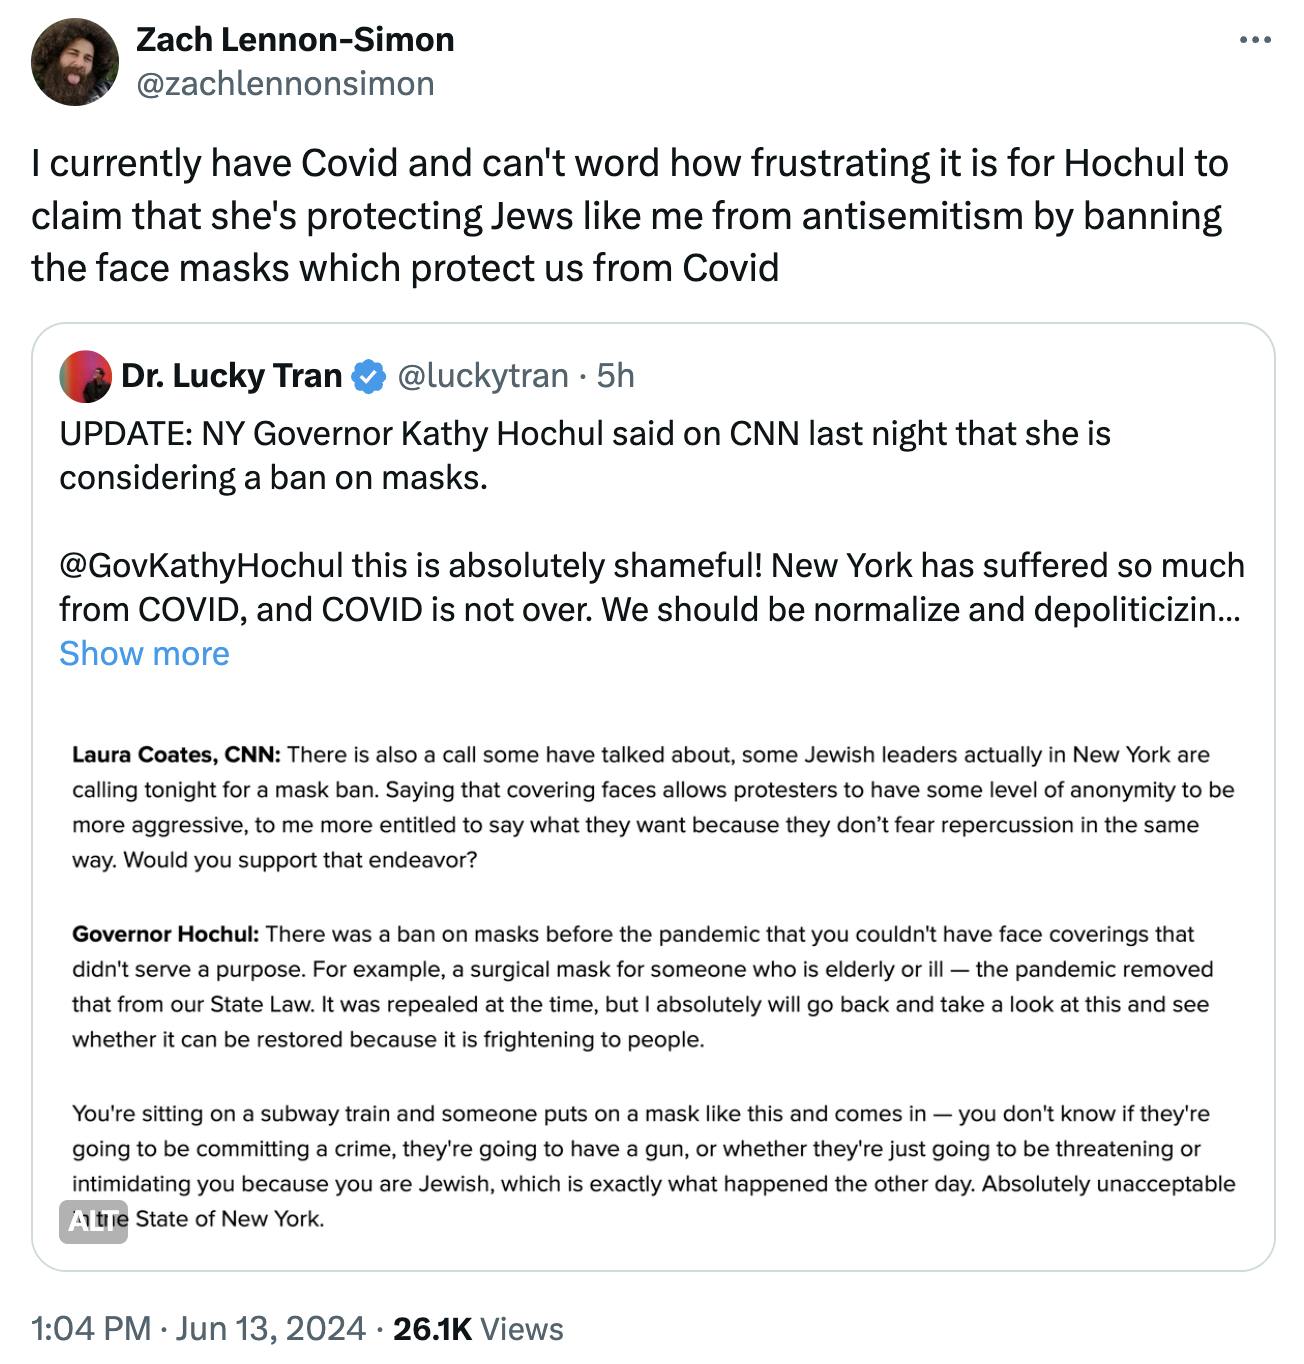 Tweet screenshot Zach Lennon-Simon: I currently have Covid and can't word how frustrating it is for Hochul to claim that she's protecting Jews like me from antisemitism by banning the face masks which protect us from Covid